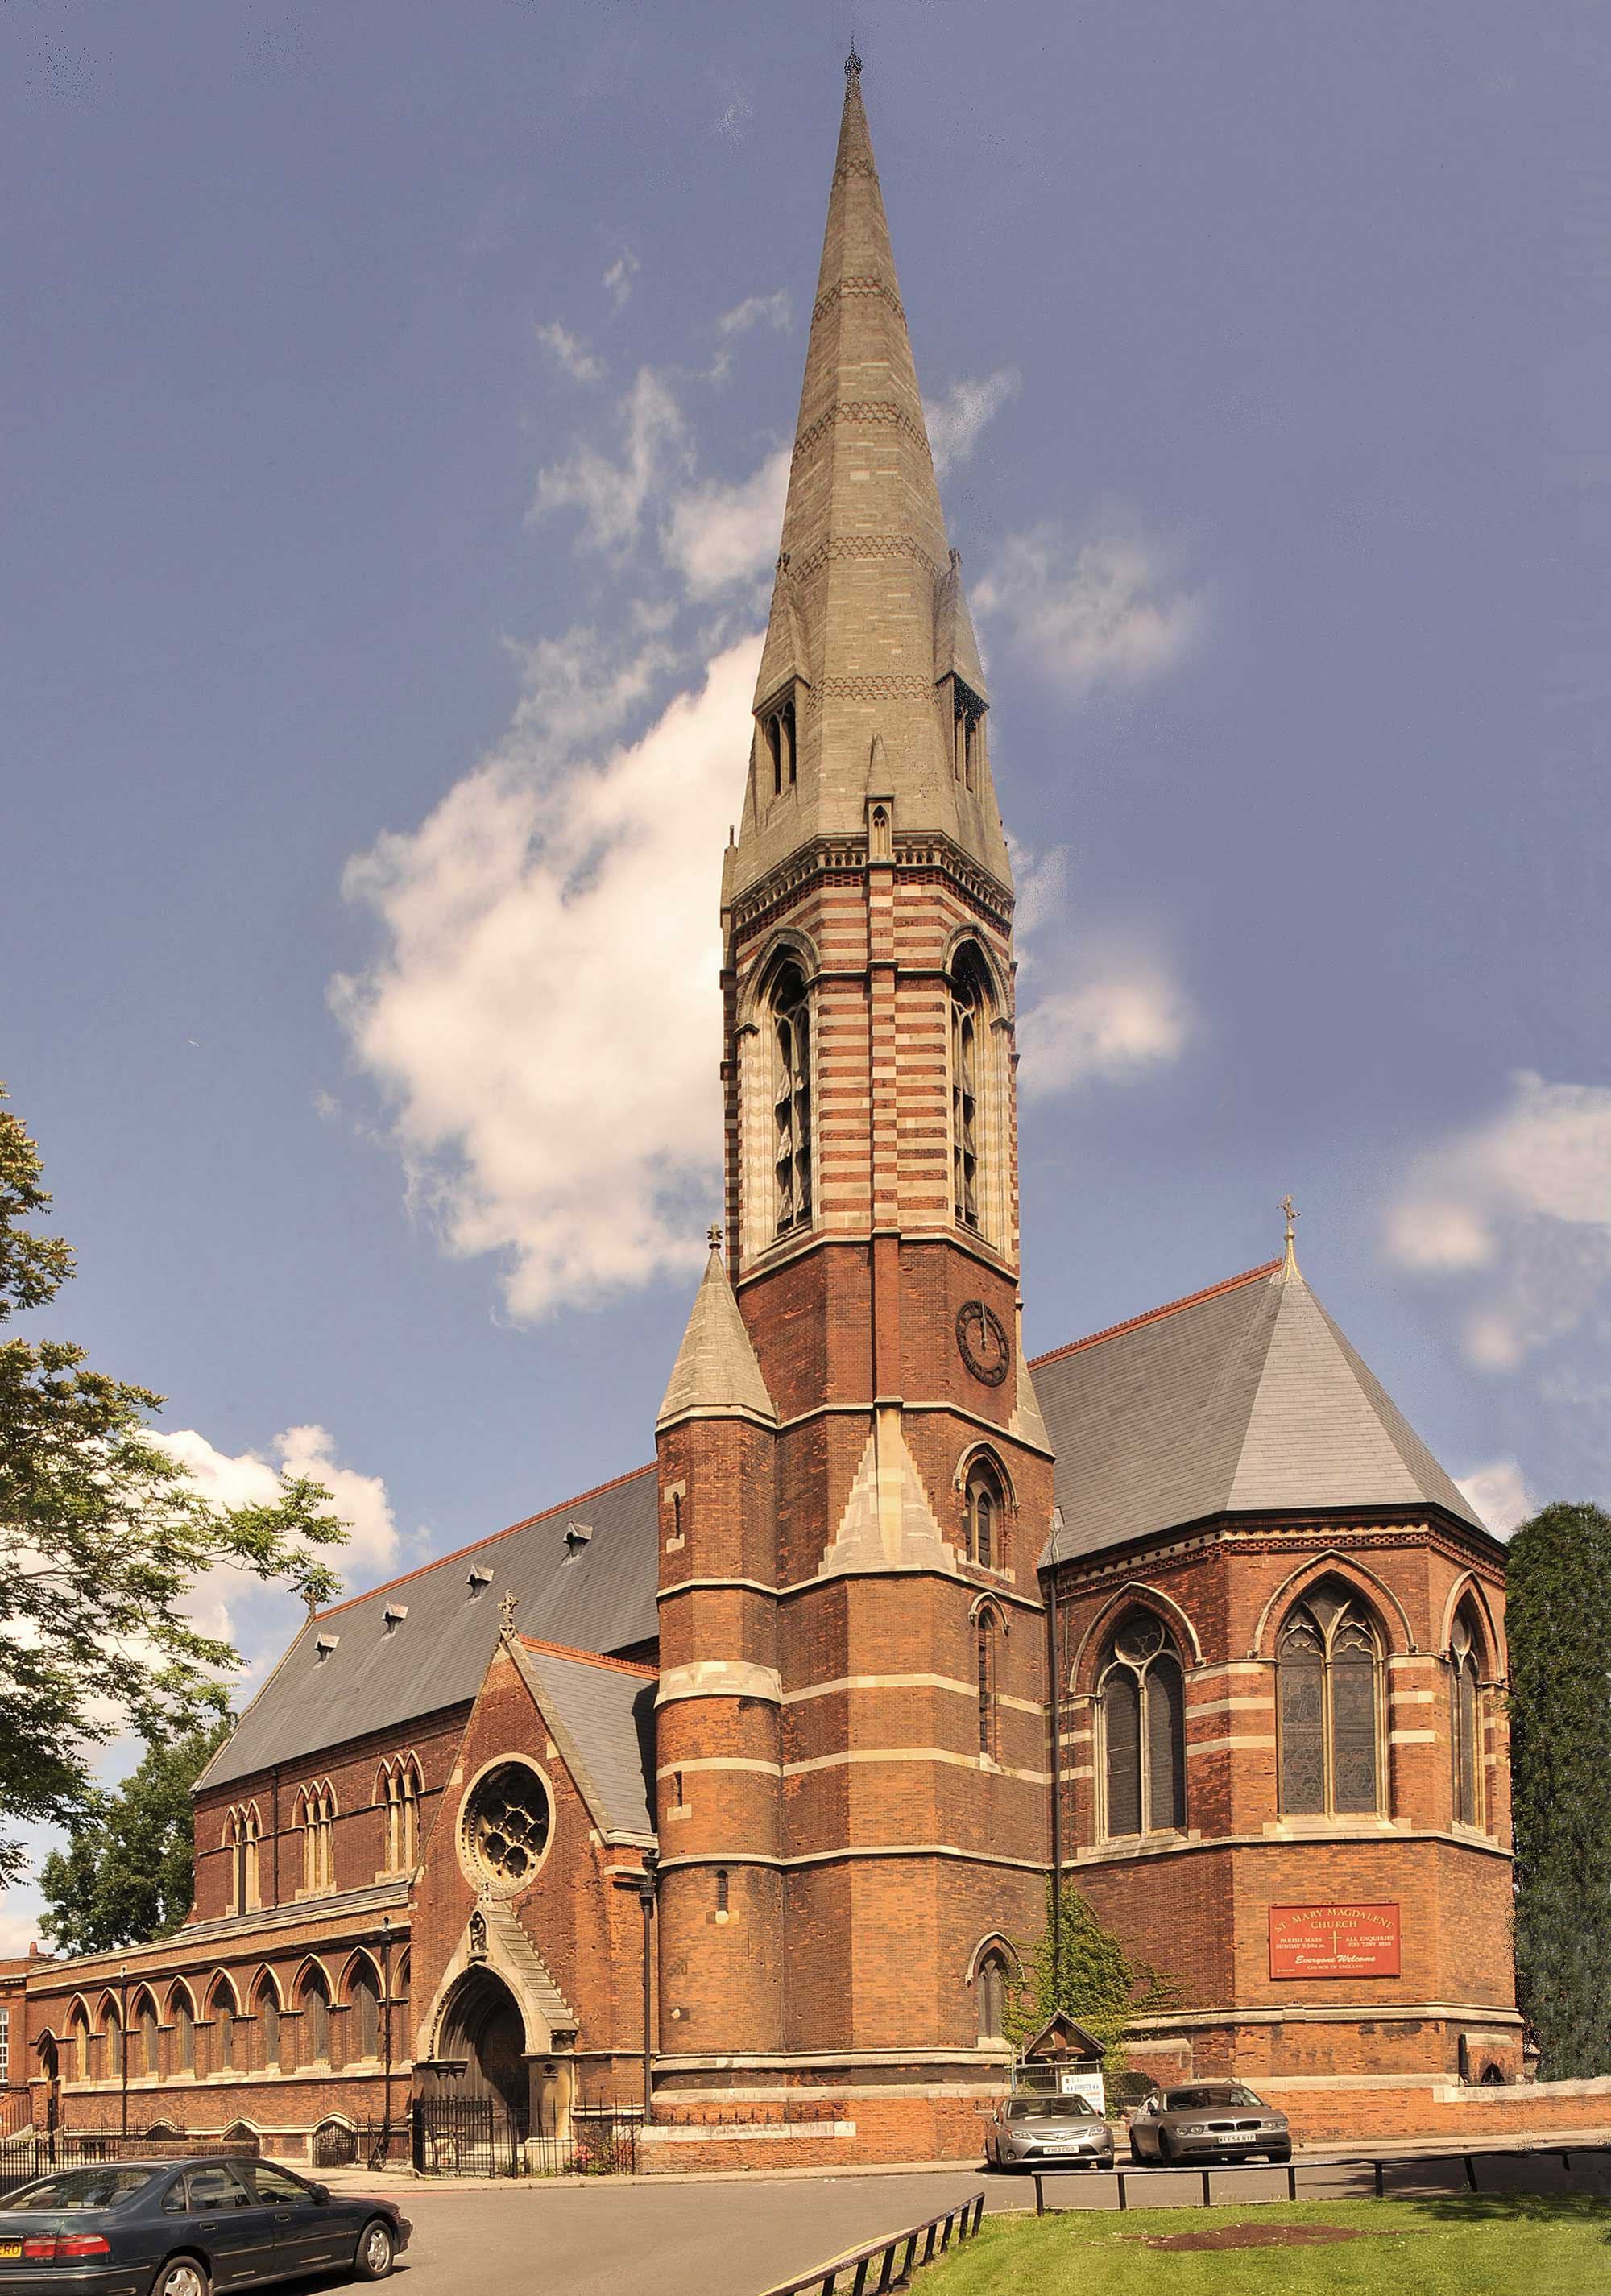 Red brick church with stone highlights and a stone spire with small windows.